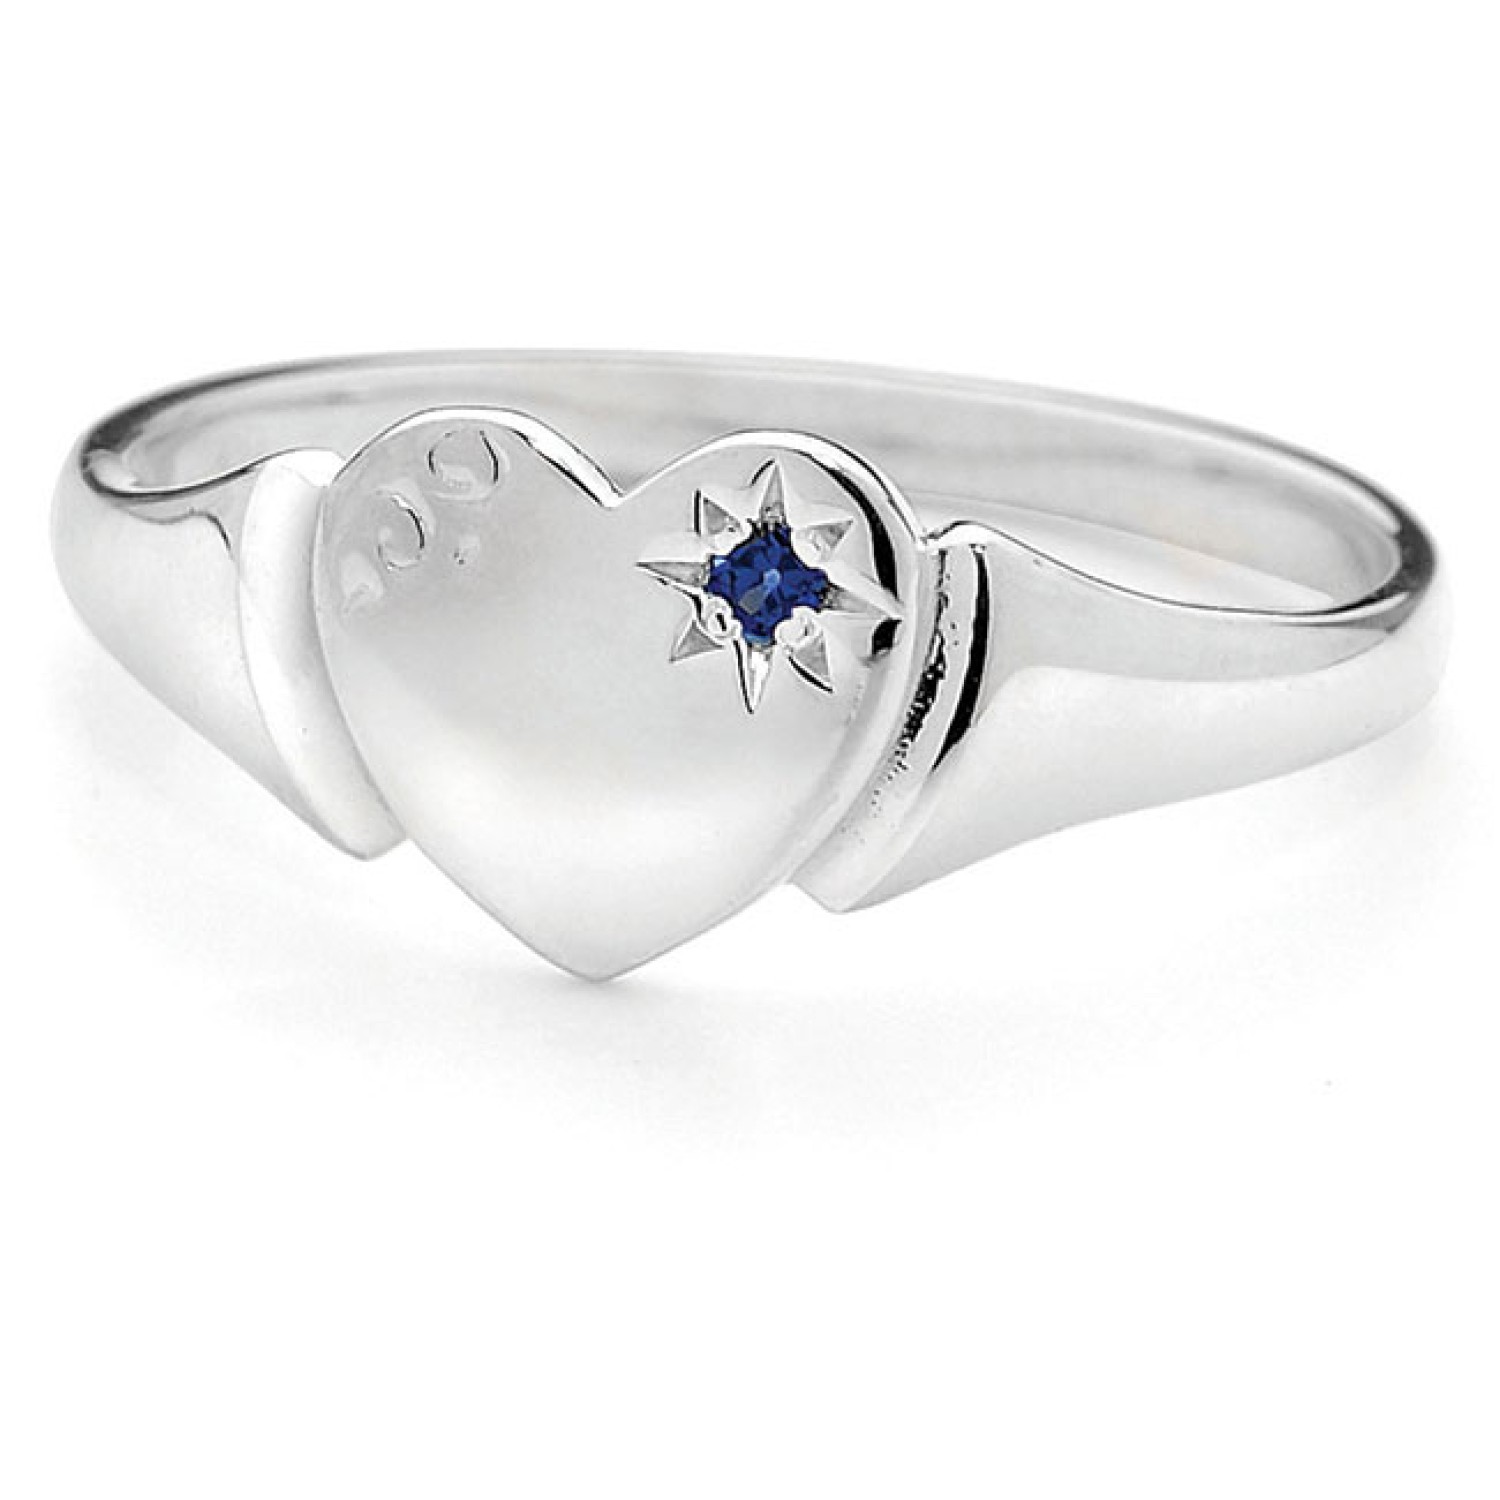 Sterling Silver Signet Heart Ring. A traditional silver heart Signet ring set with a blue cubic zirconia. Solid 925 Sterling Silver Christies exclusive 5 year guarantee 3 Months No Payments and Interest for Q Card holders Gift wrapped on request Set @chri